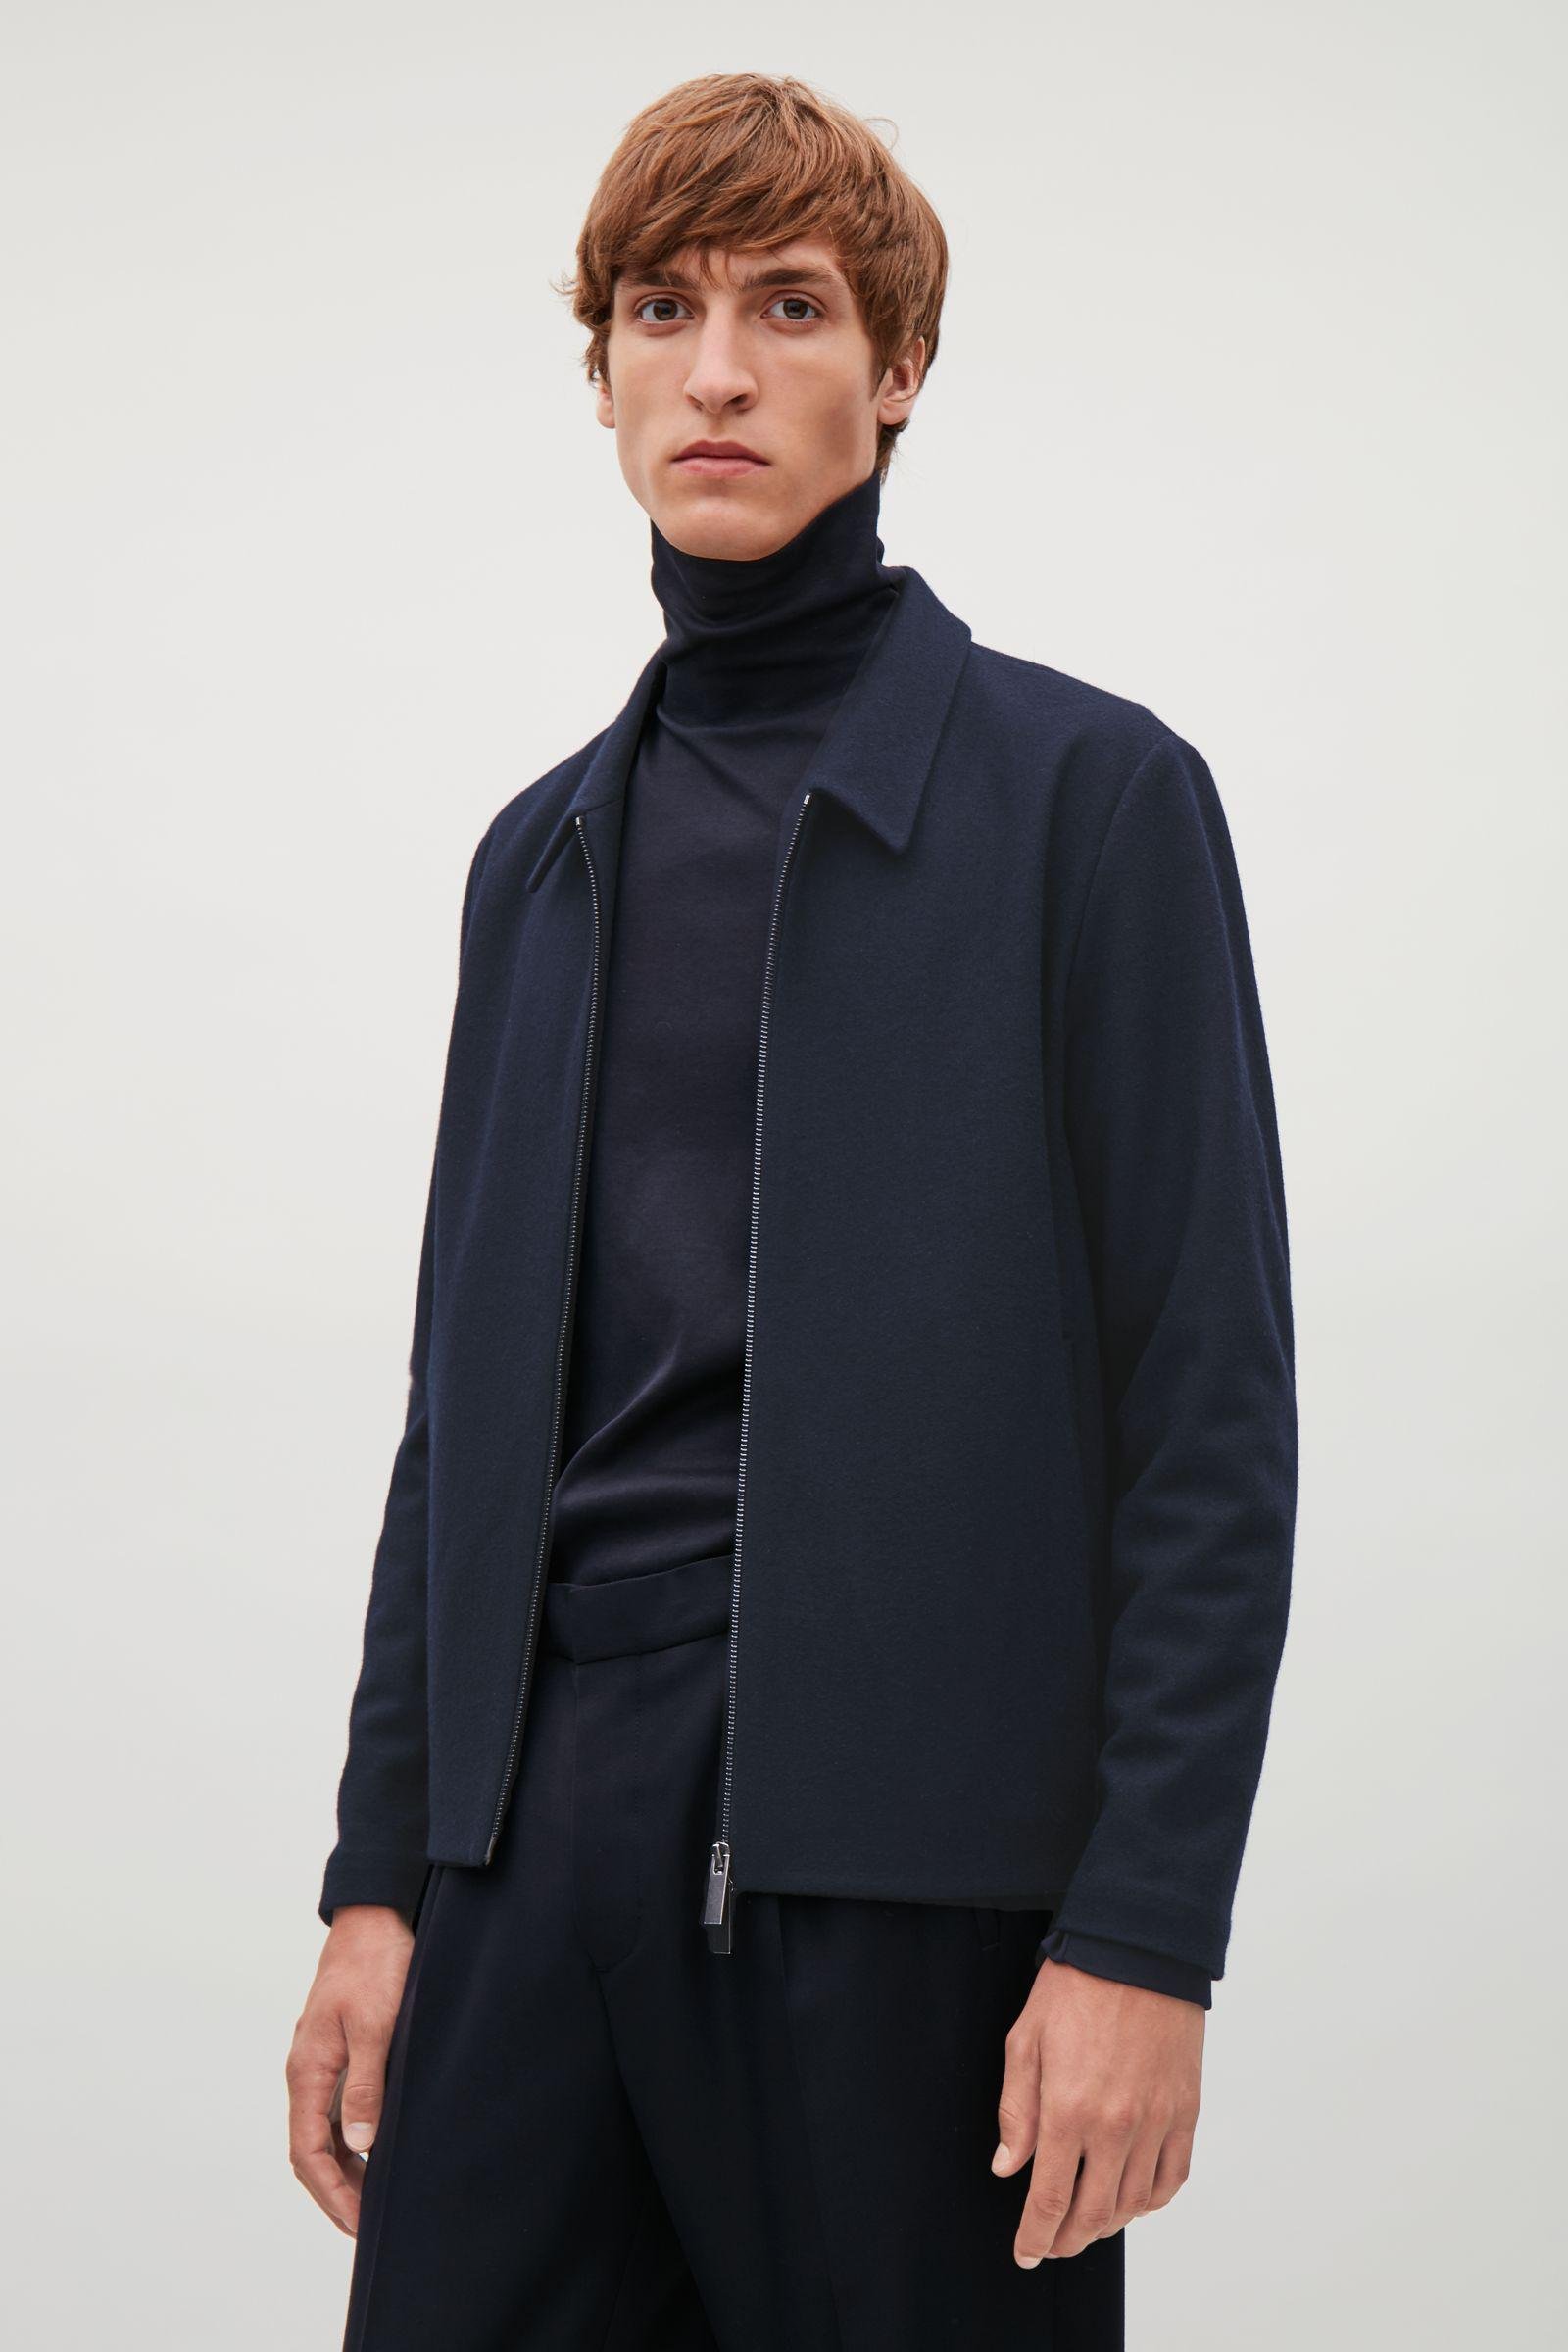 Lyst - Cos Jacket With Pointed Collar in Blue for Men